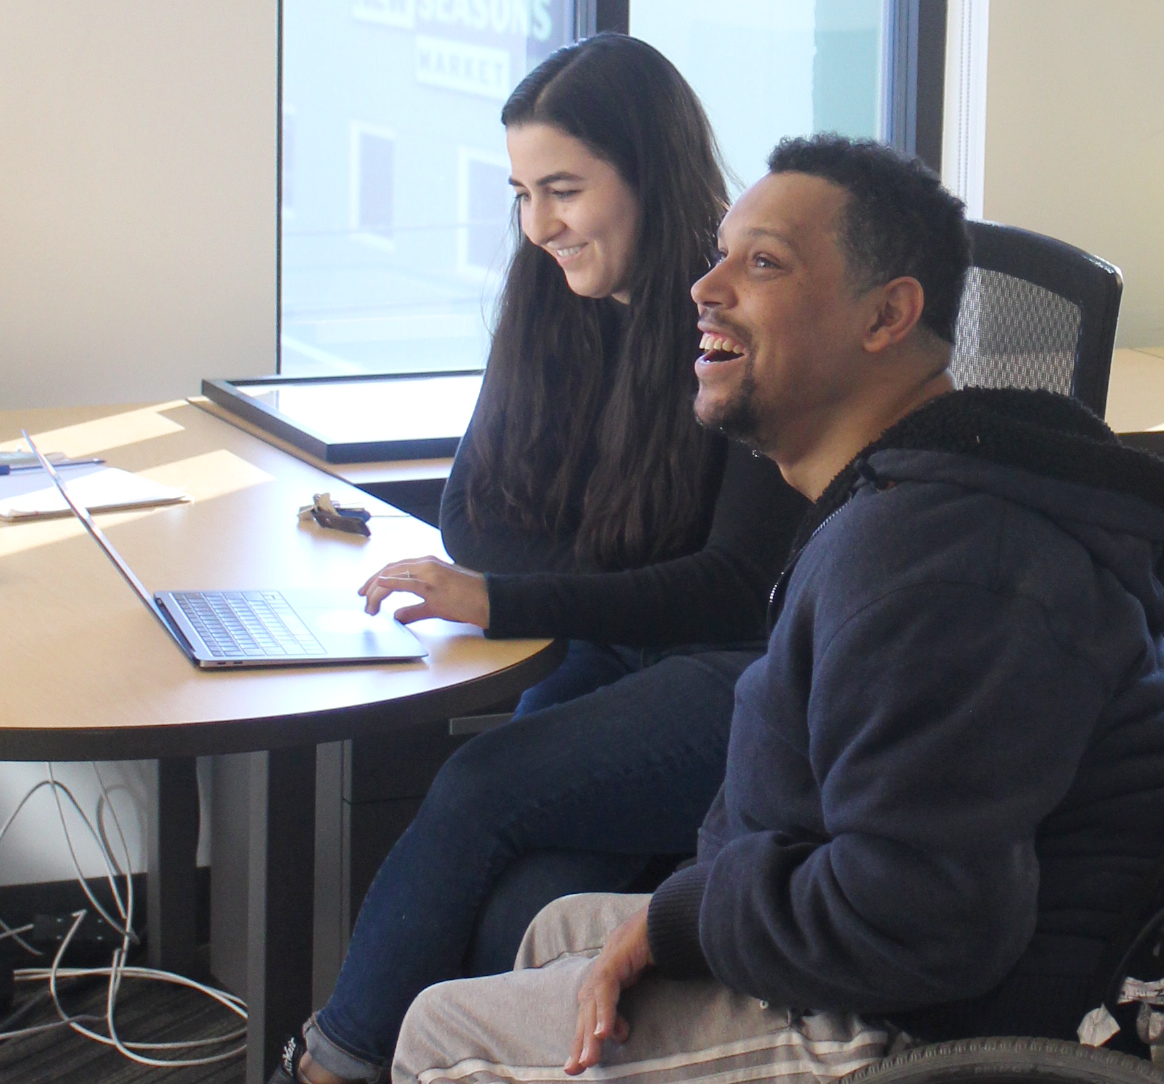 Two smiling people sitting at a desk working on a laptop